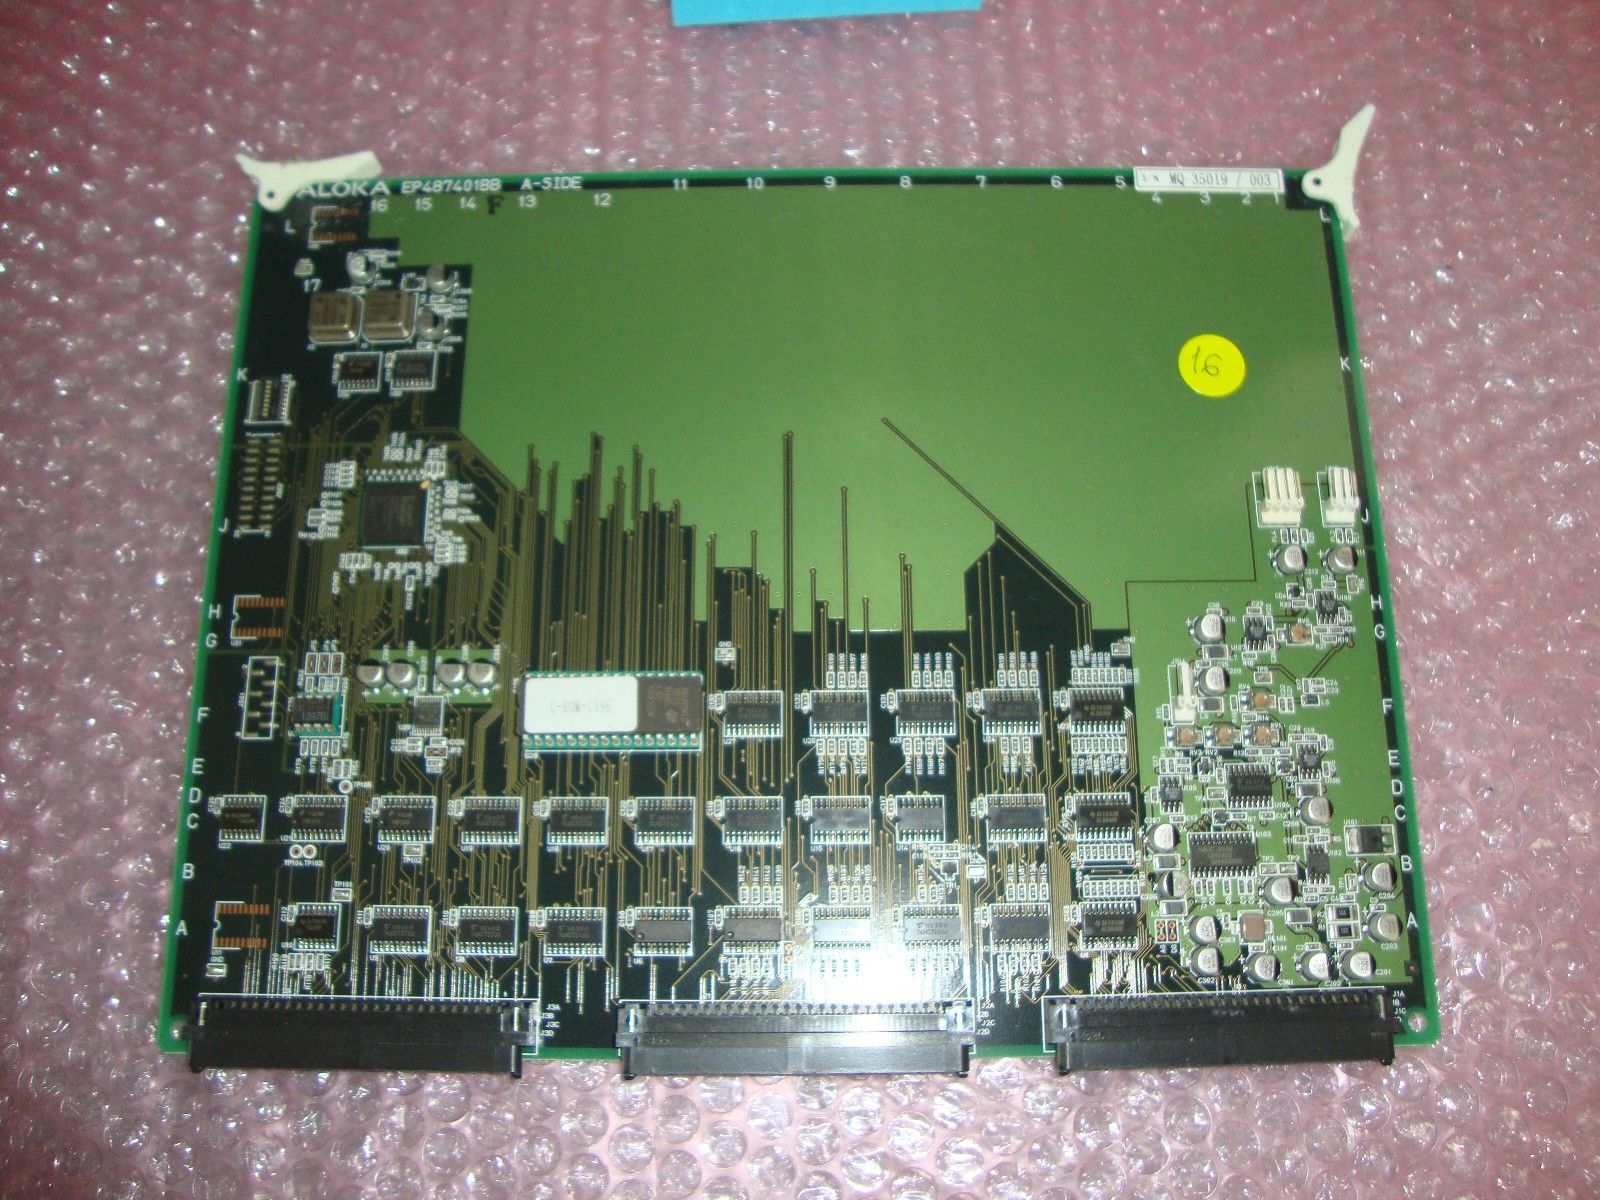 ALOKA SSD-1400 Ultrasound board  ep487401bb  a side DIAGNOSTIC ULTRASOUND MACHINES FOR SALE